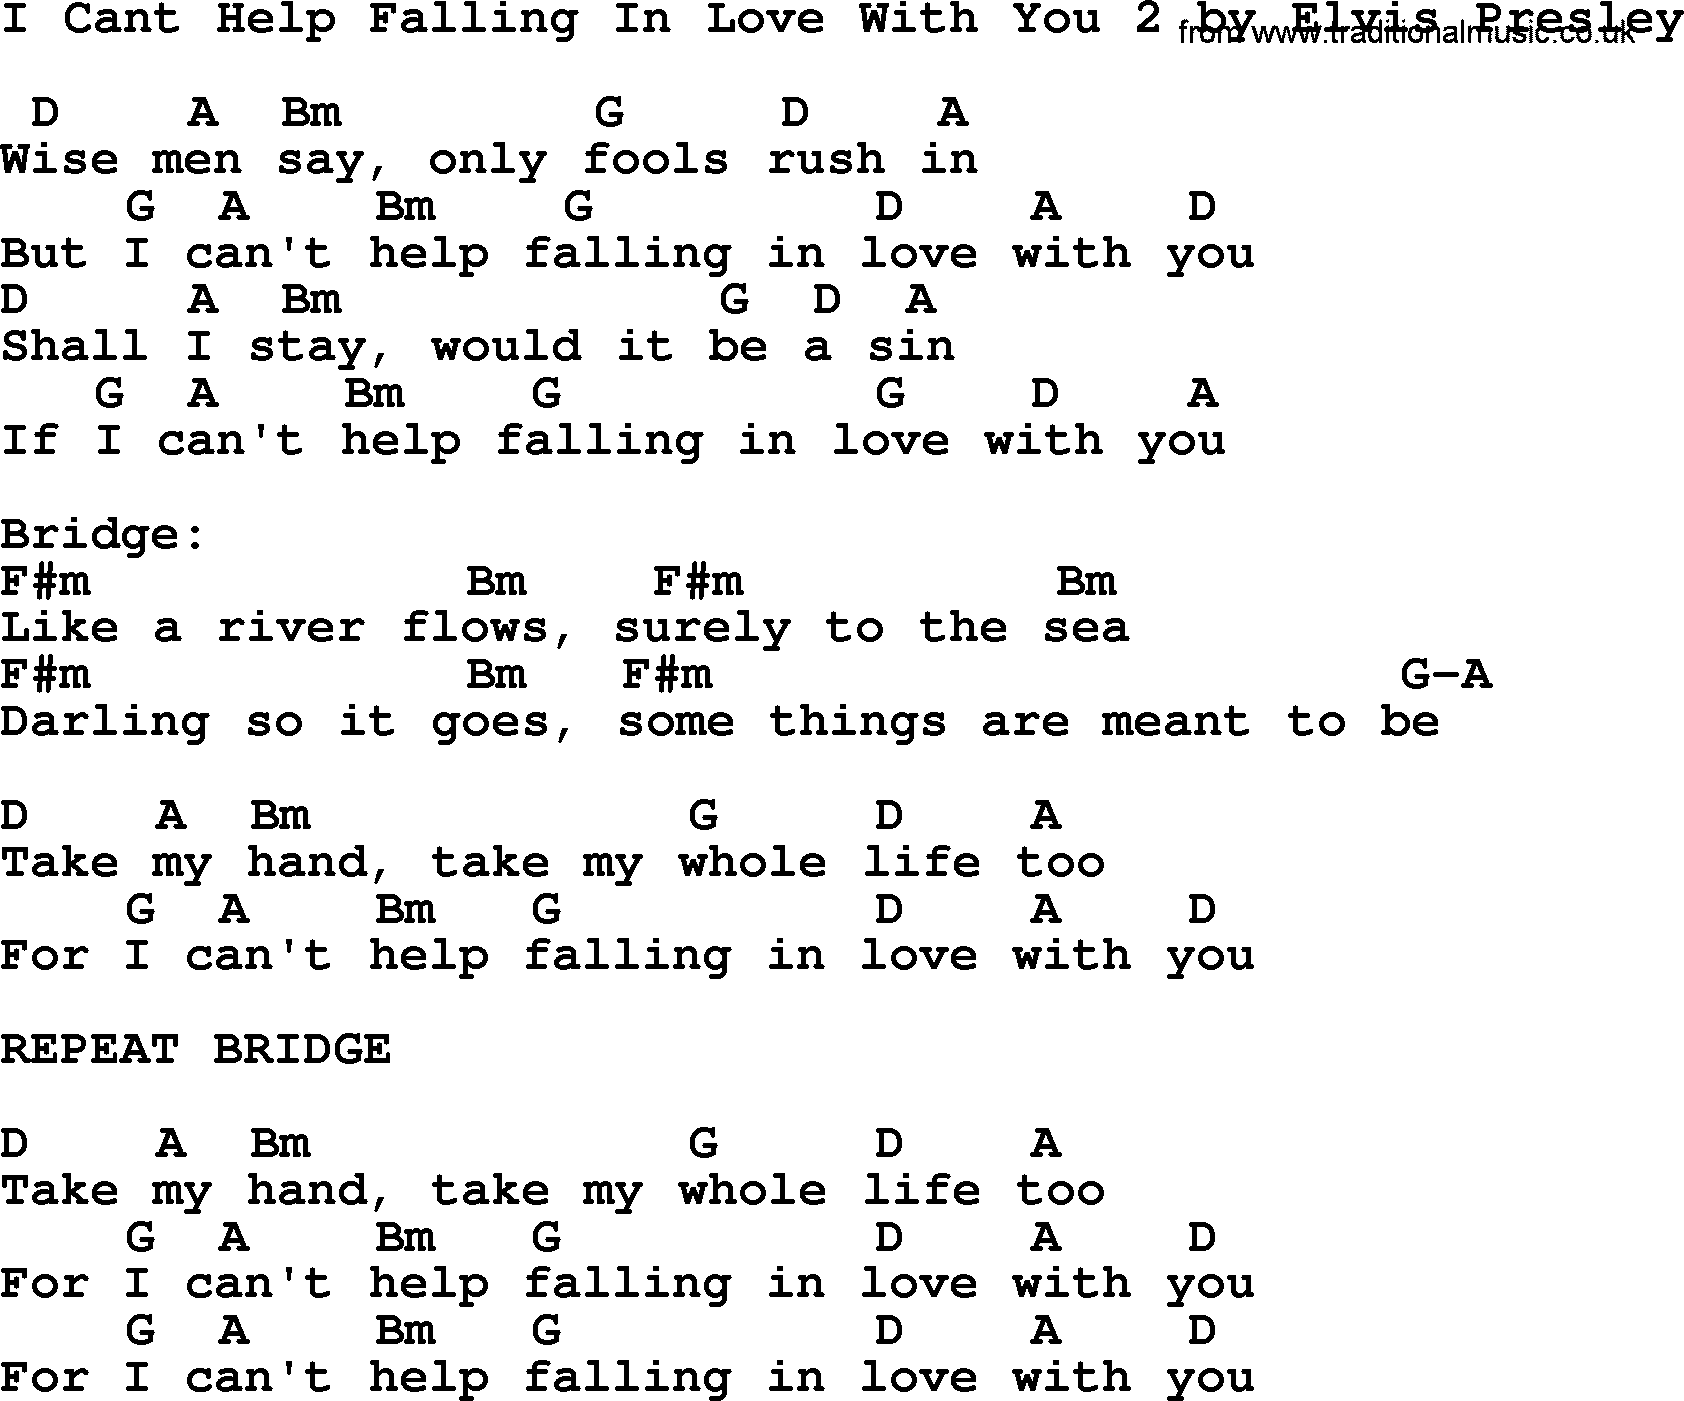 Elvis Presley song: I Cant Help Falling In Love With You 2, lyrics and chords